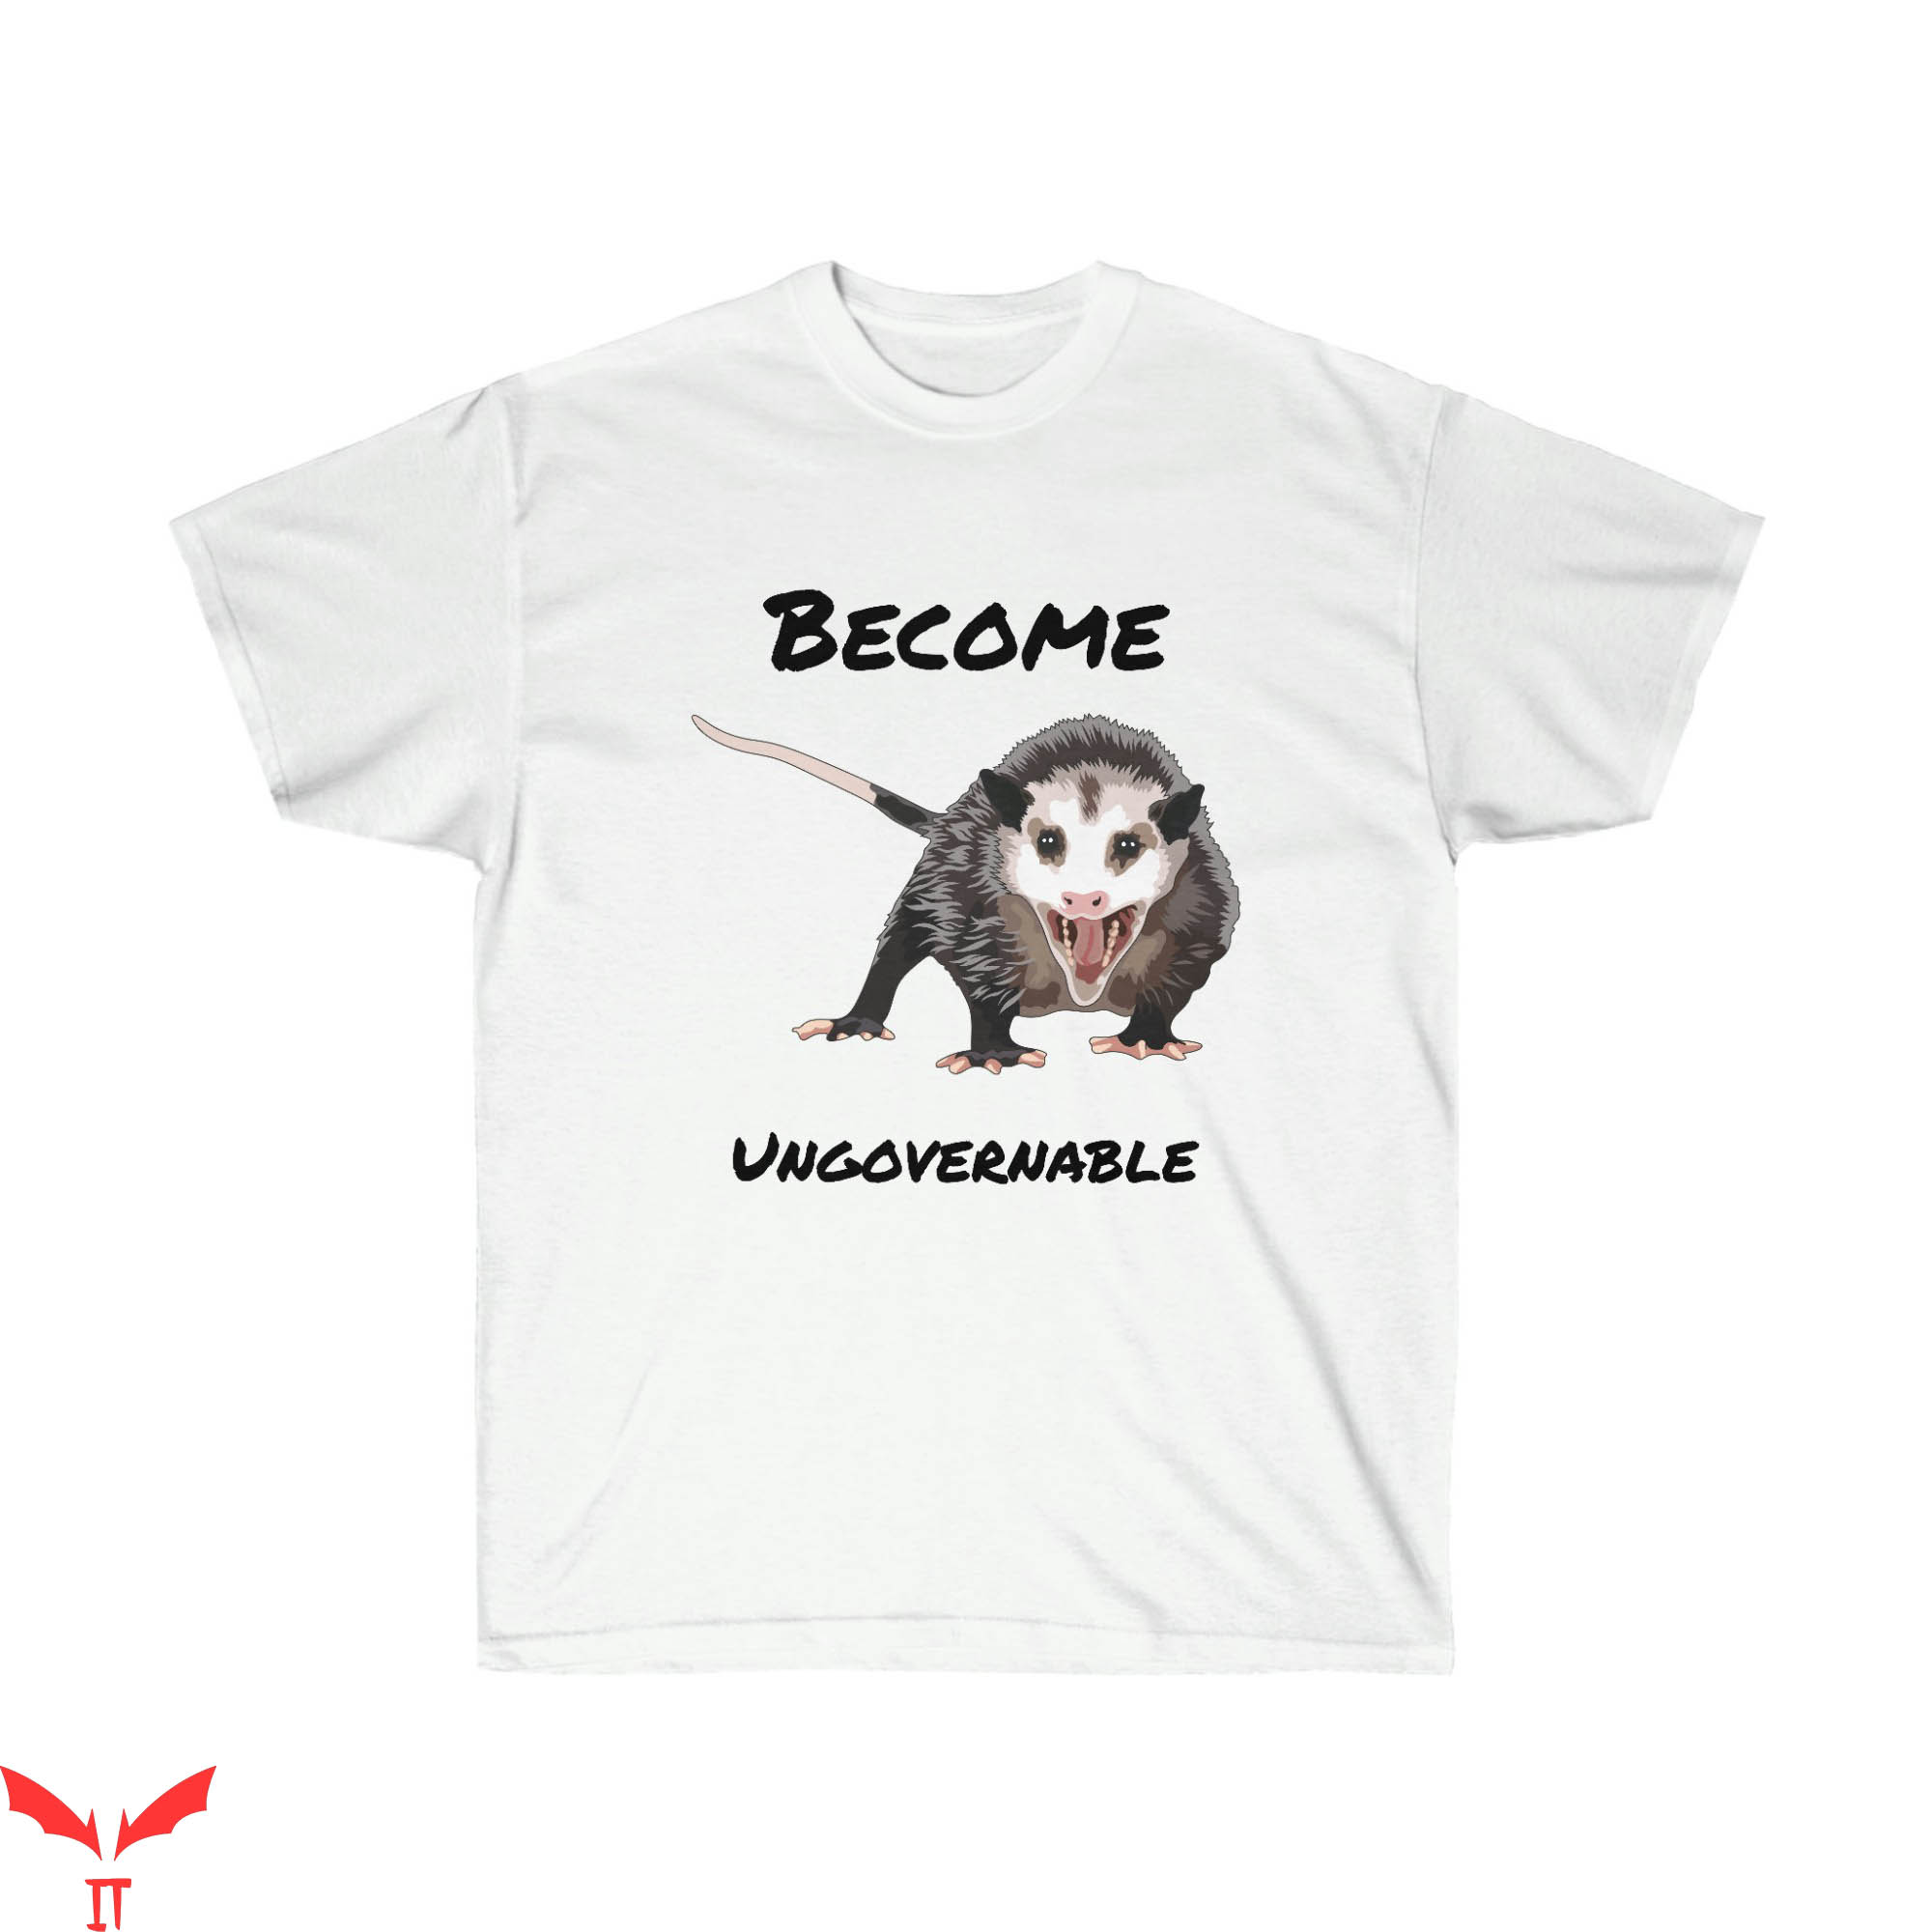 Become Ungovernable T-Shirt Funny Meme Cool Style Tee Shirt